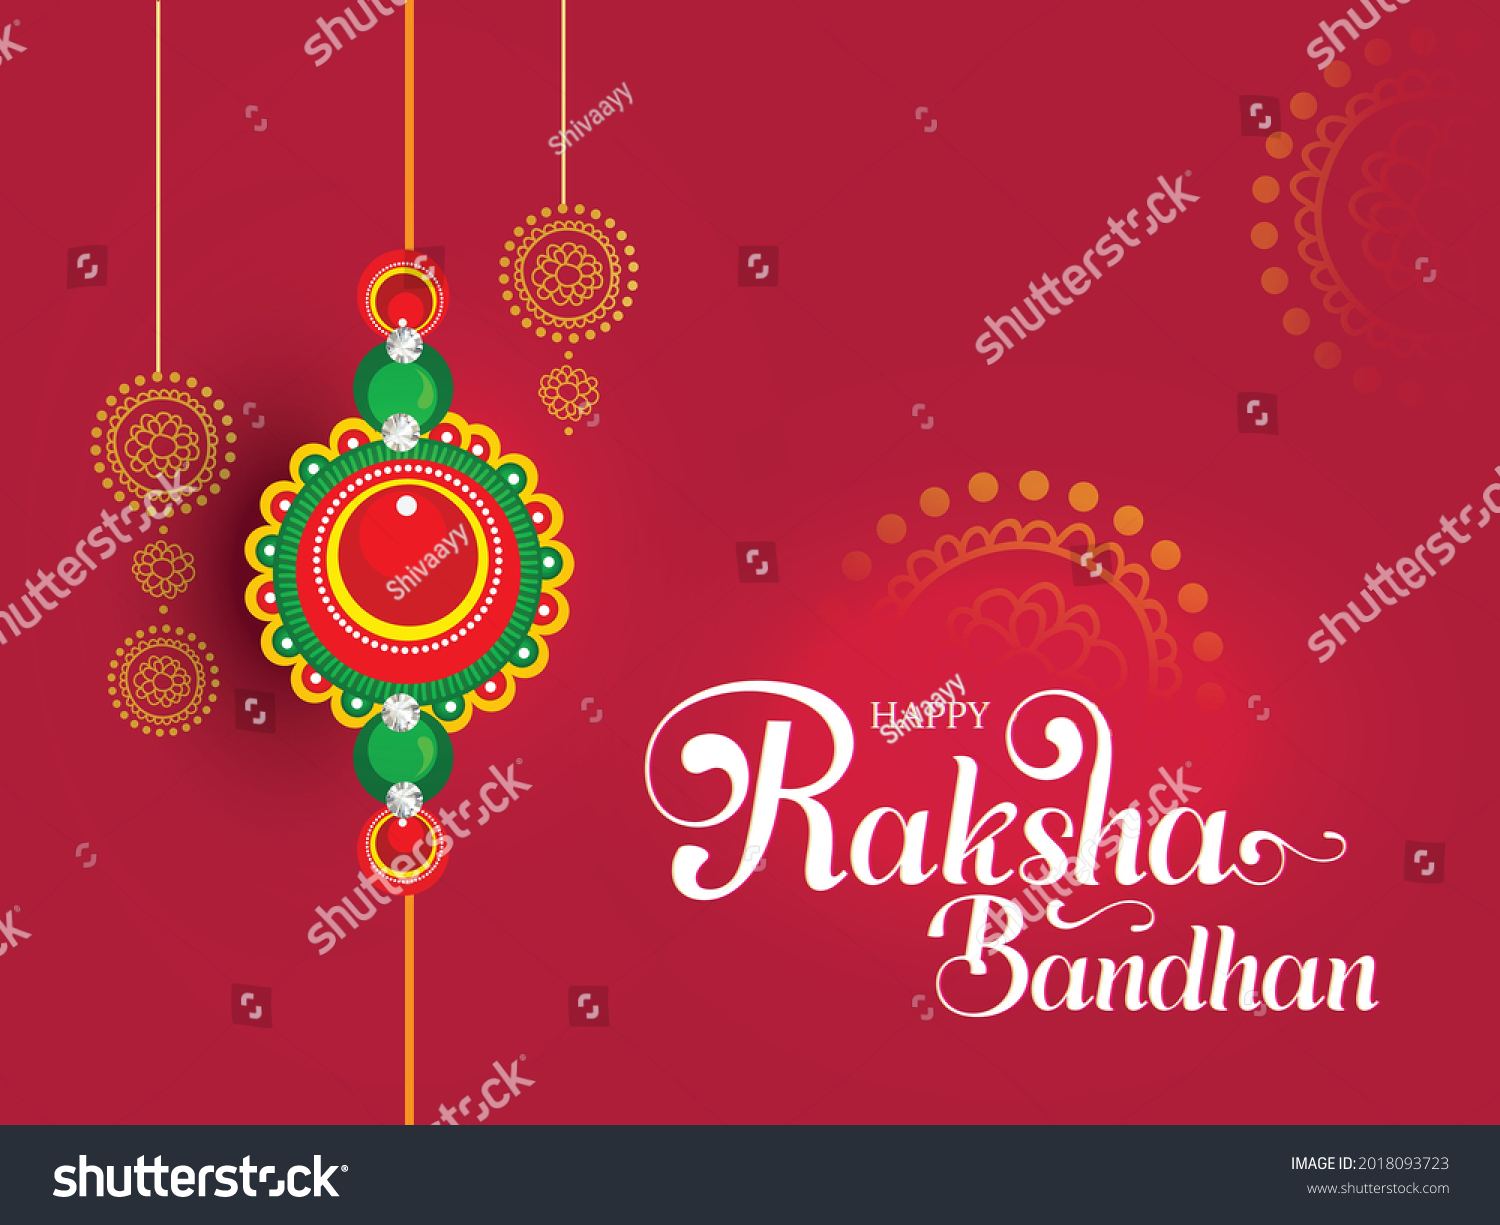 SVG of Beautiful Rakhi Design on Traditional Background with Creative Hand Lettering Text 